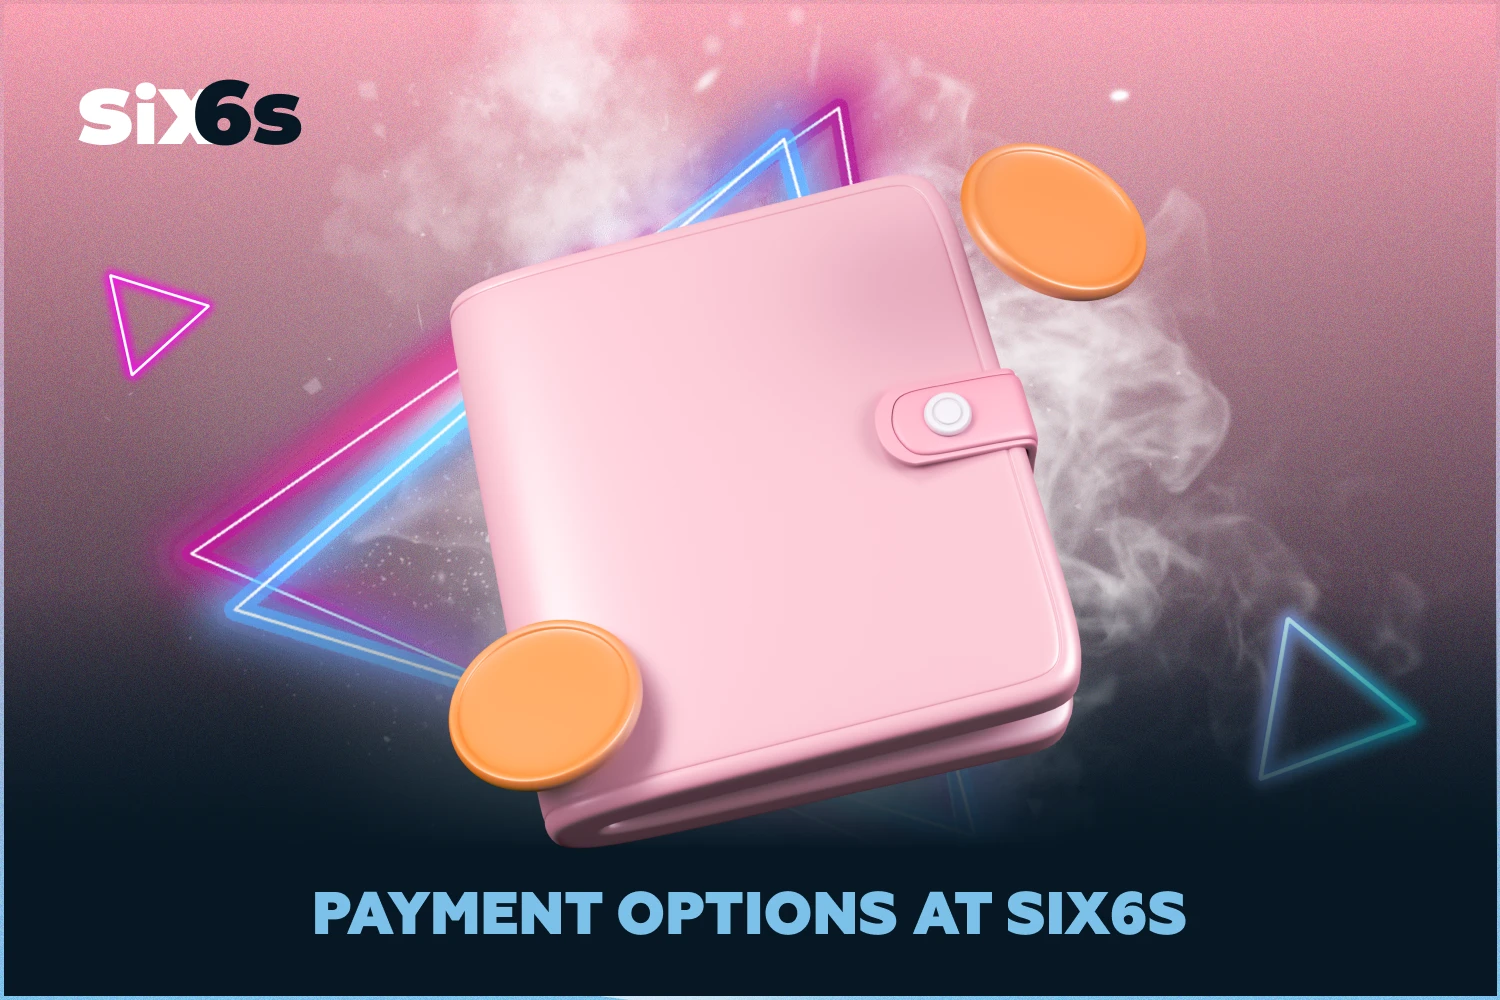 For deposits and withdrawals, Six6s has a number of popular payment methods for Bangladeshi users